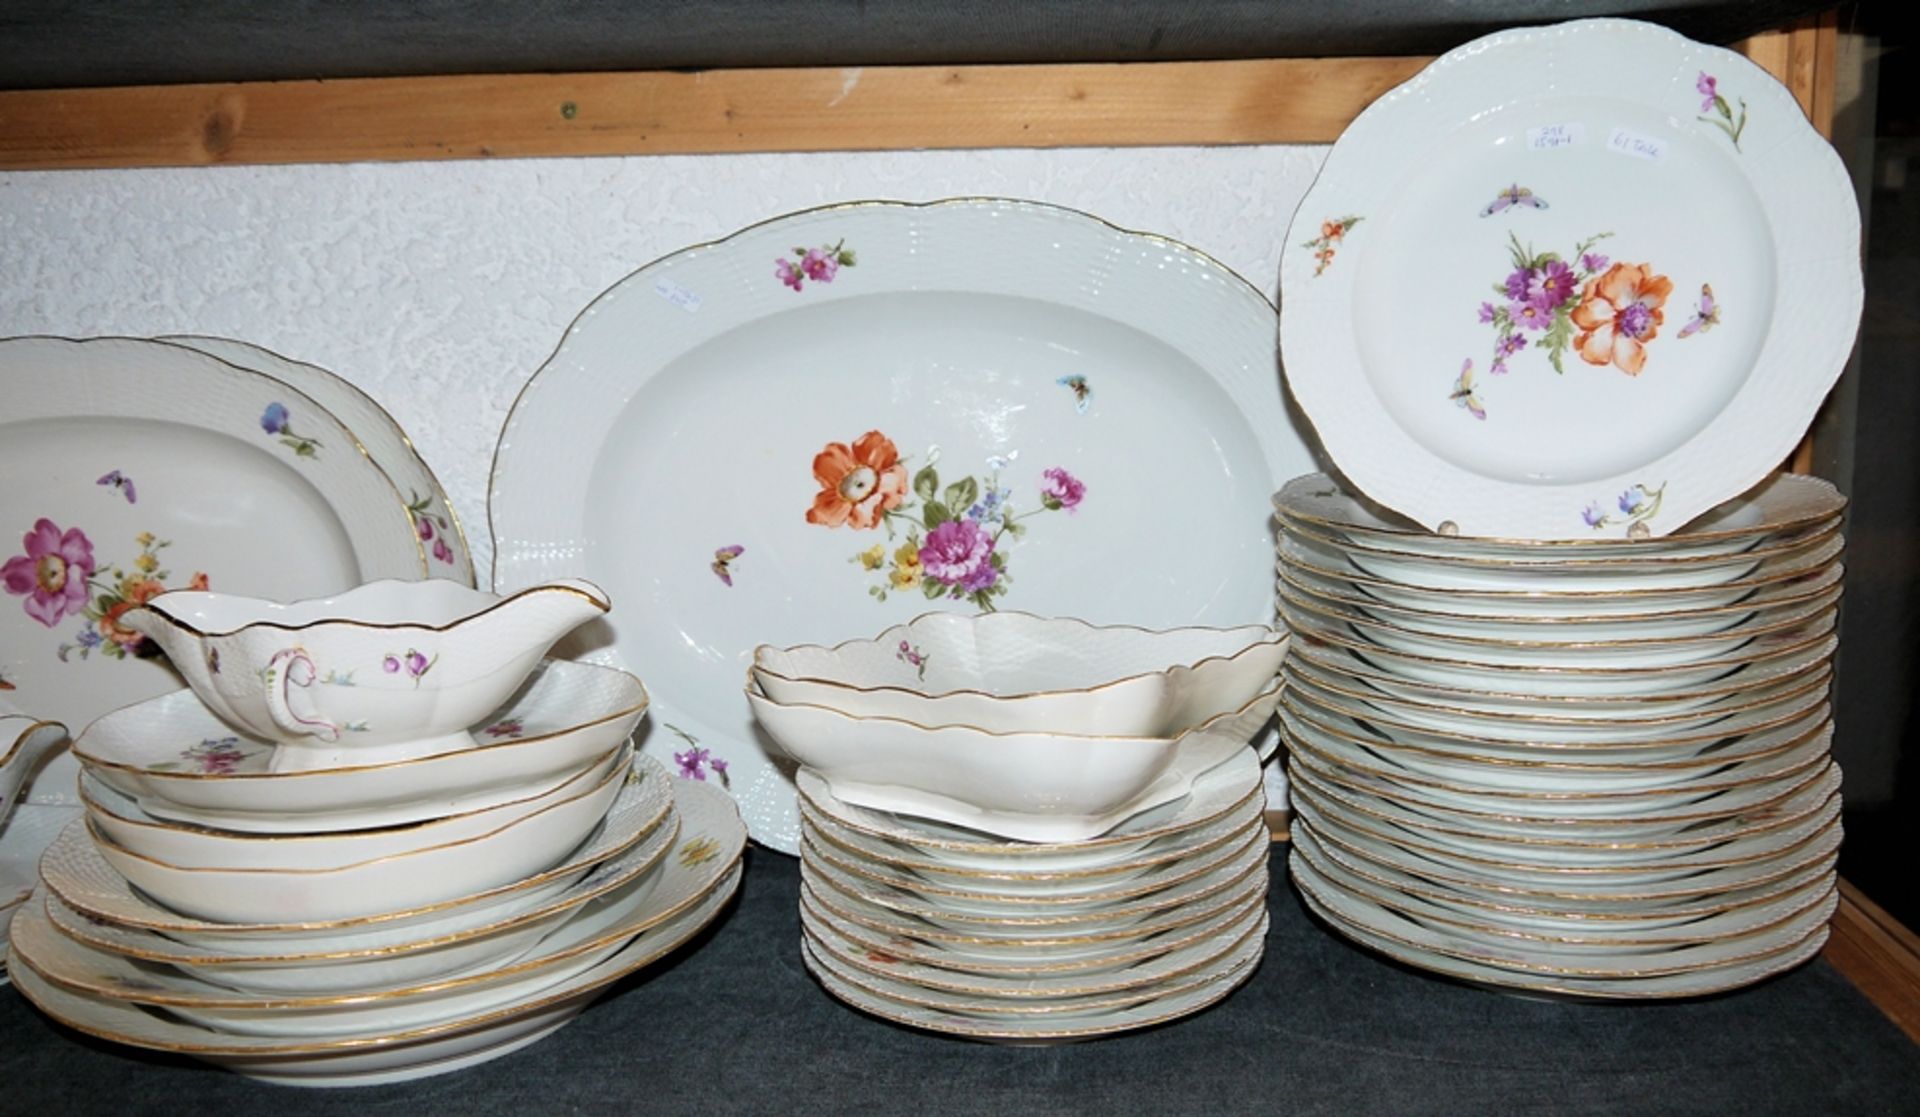 Extensive porcelain dinner service in the shape of "Osier" with flowers and insects for 9-20 person - Image 3 of 3